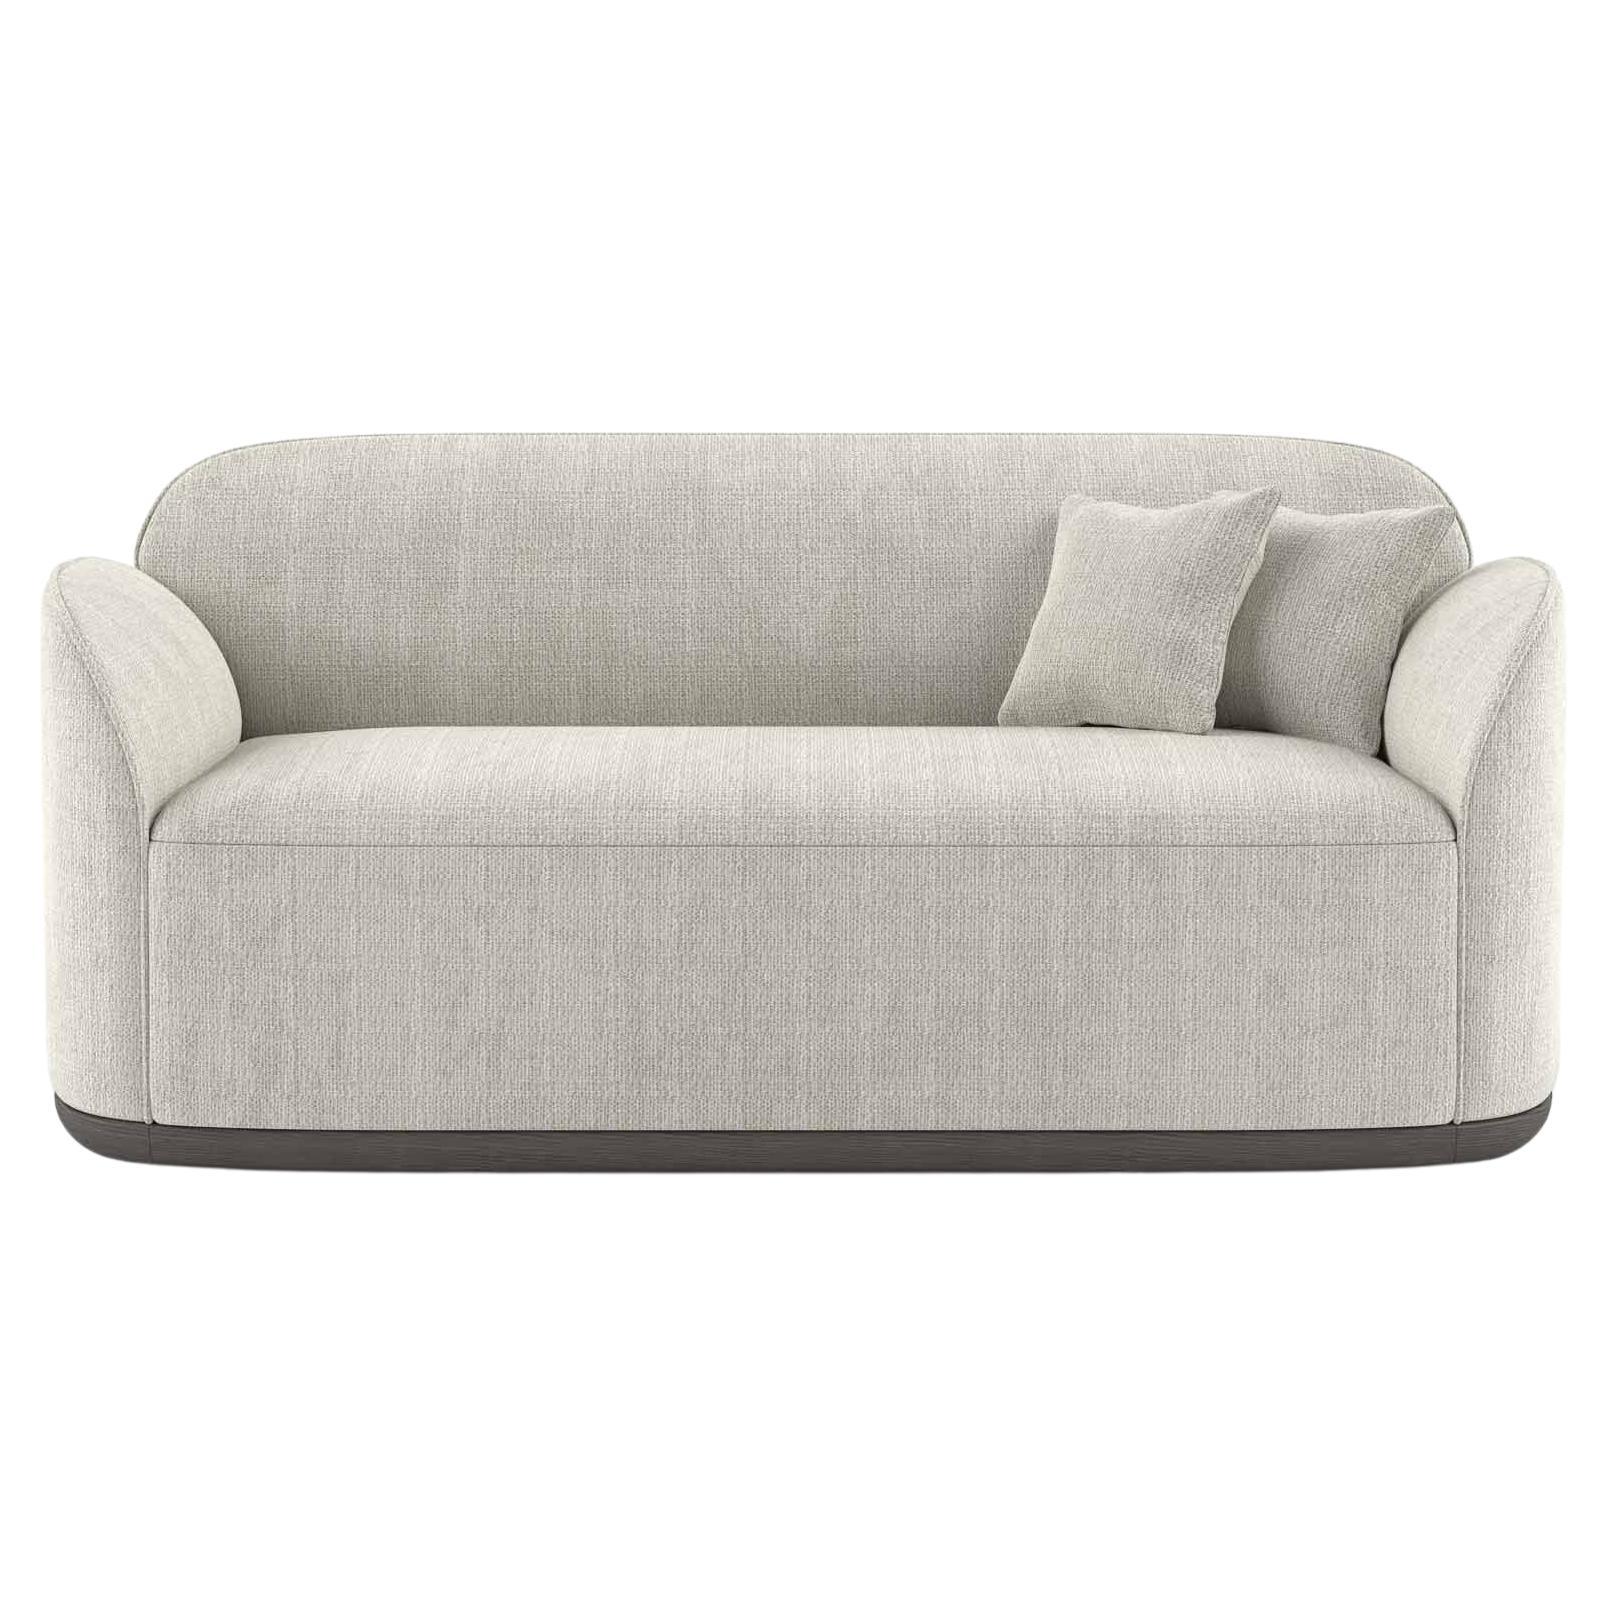 Unio Loveseat Upholstered with Larsen Fox Fabric by Poiat